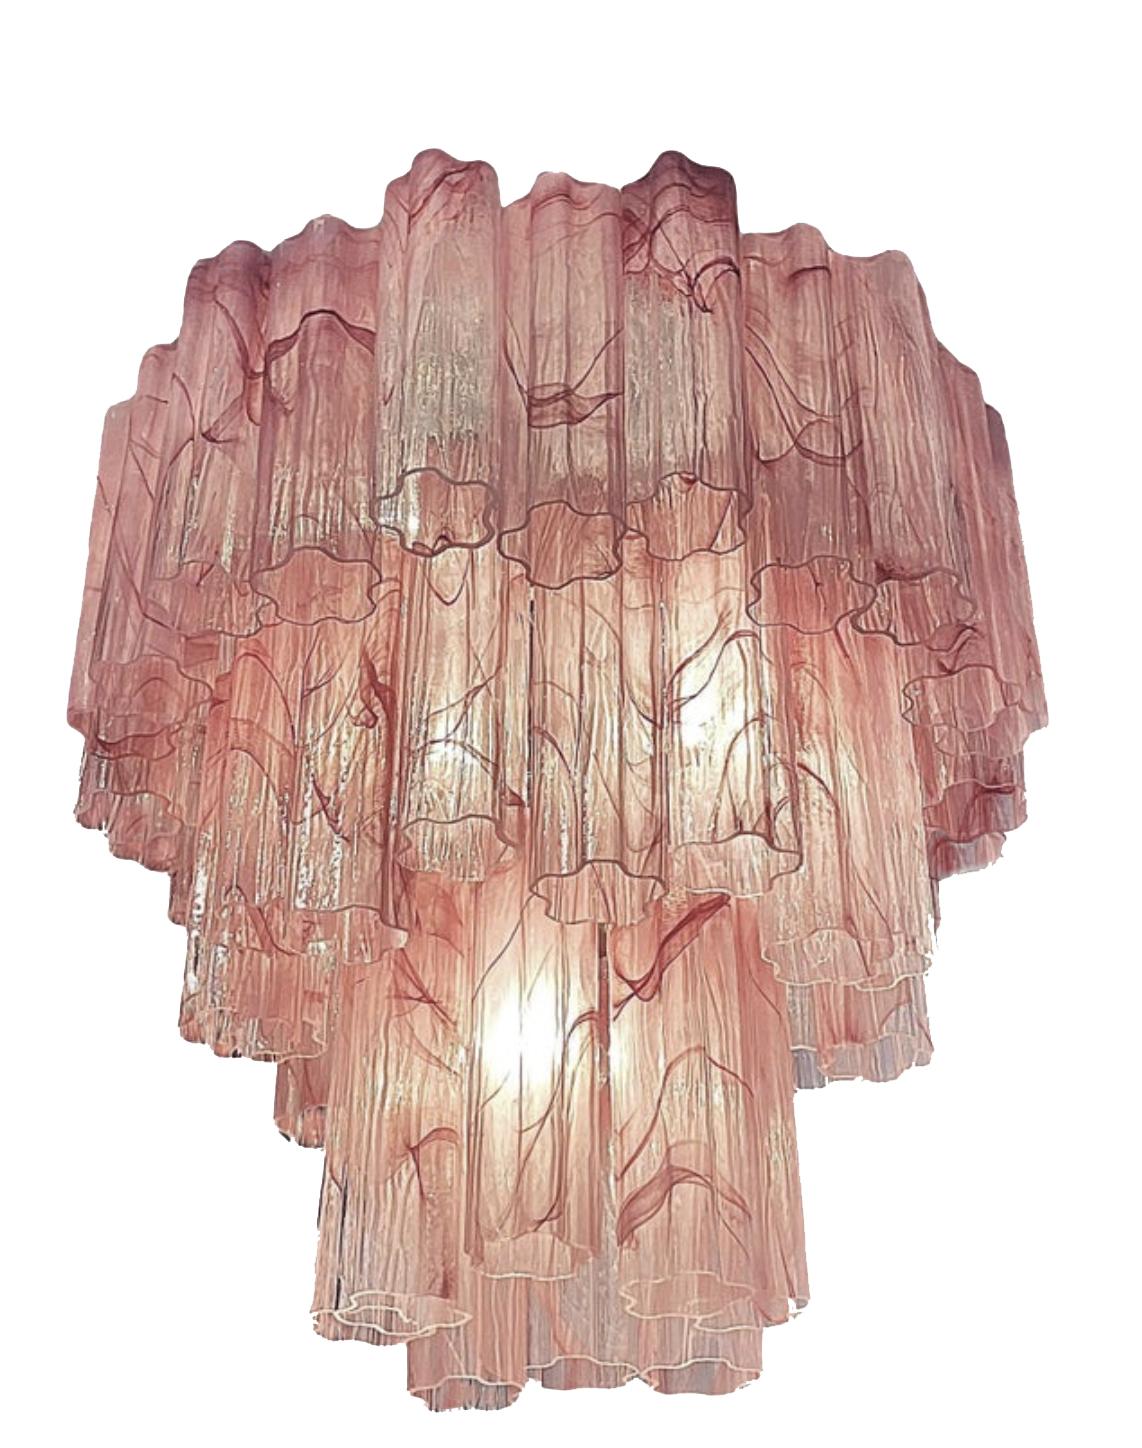 Elegant Large Three-Tier Murano Glass Tube Chandeliers, Pink Alabaster For Sale 12